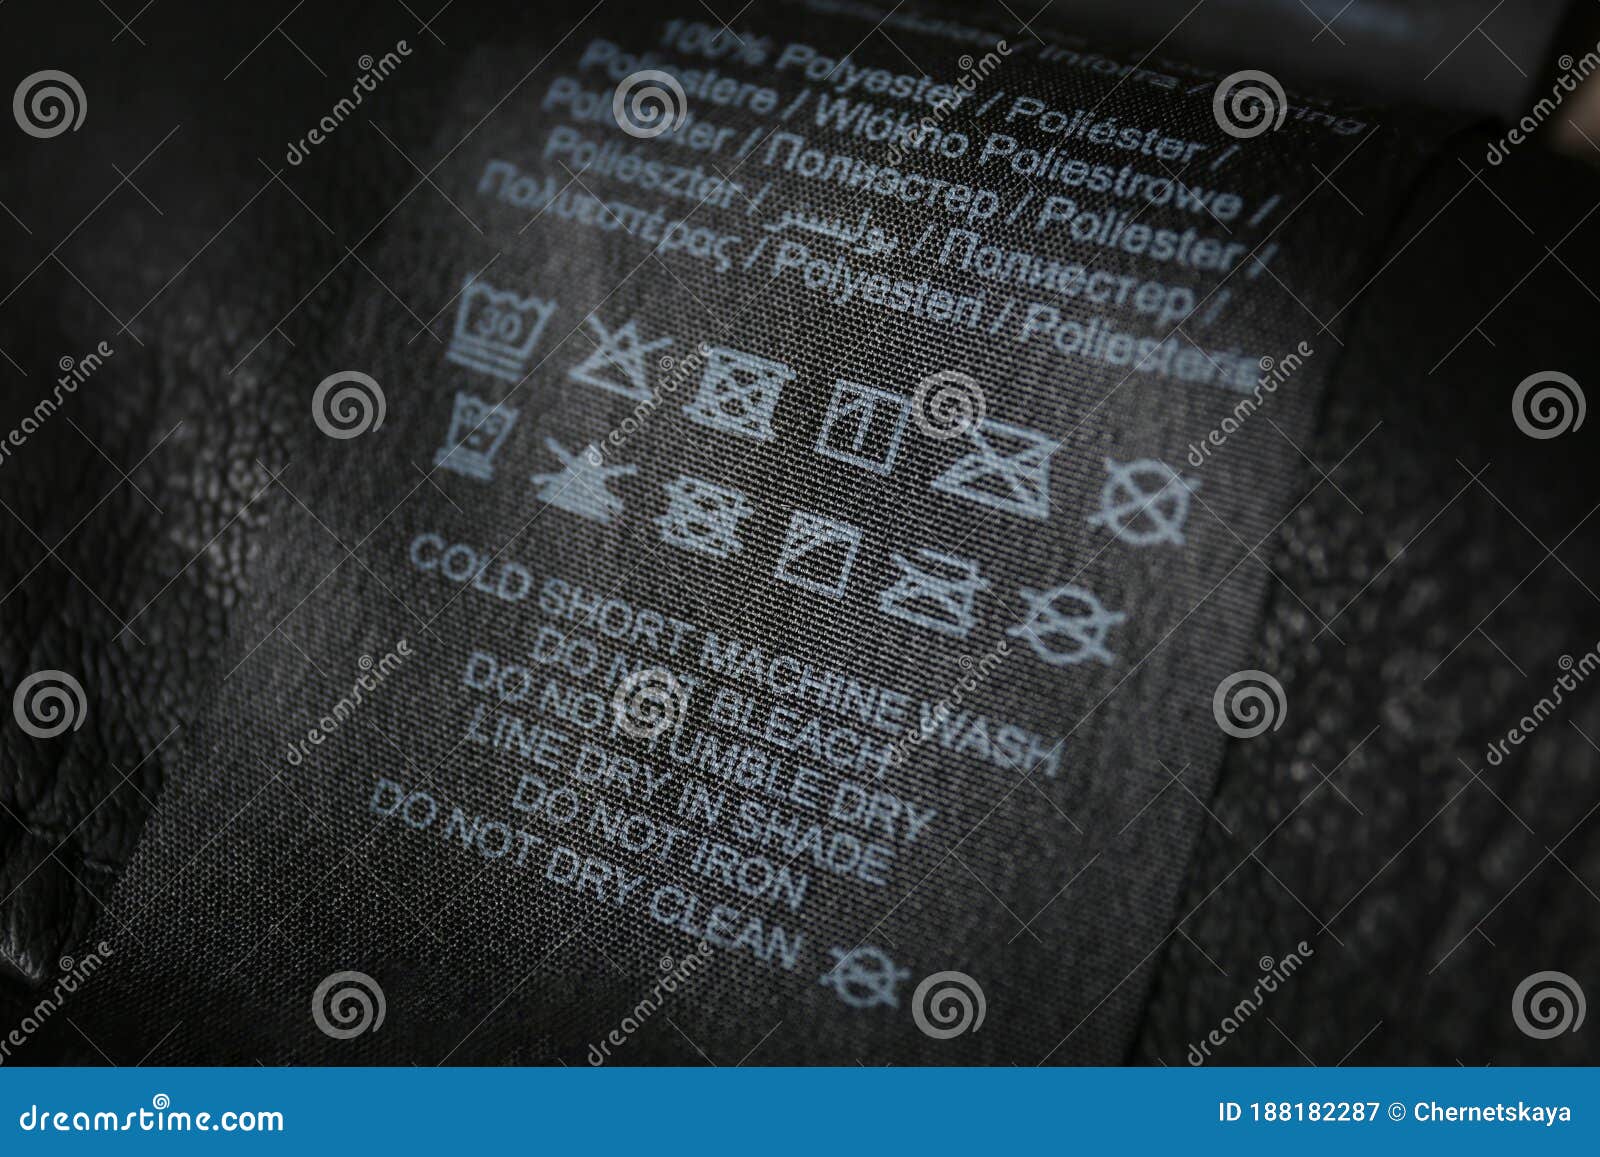 Clothing Label with Care Symbols and Material Content on Black Shirt ...